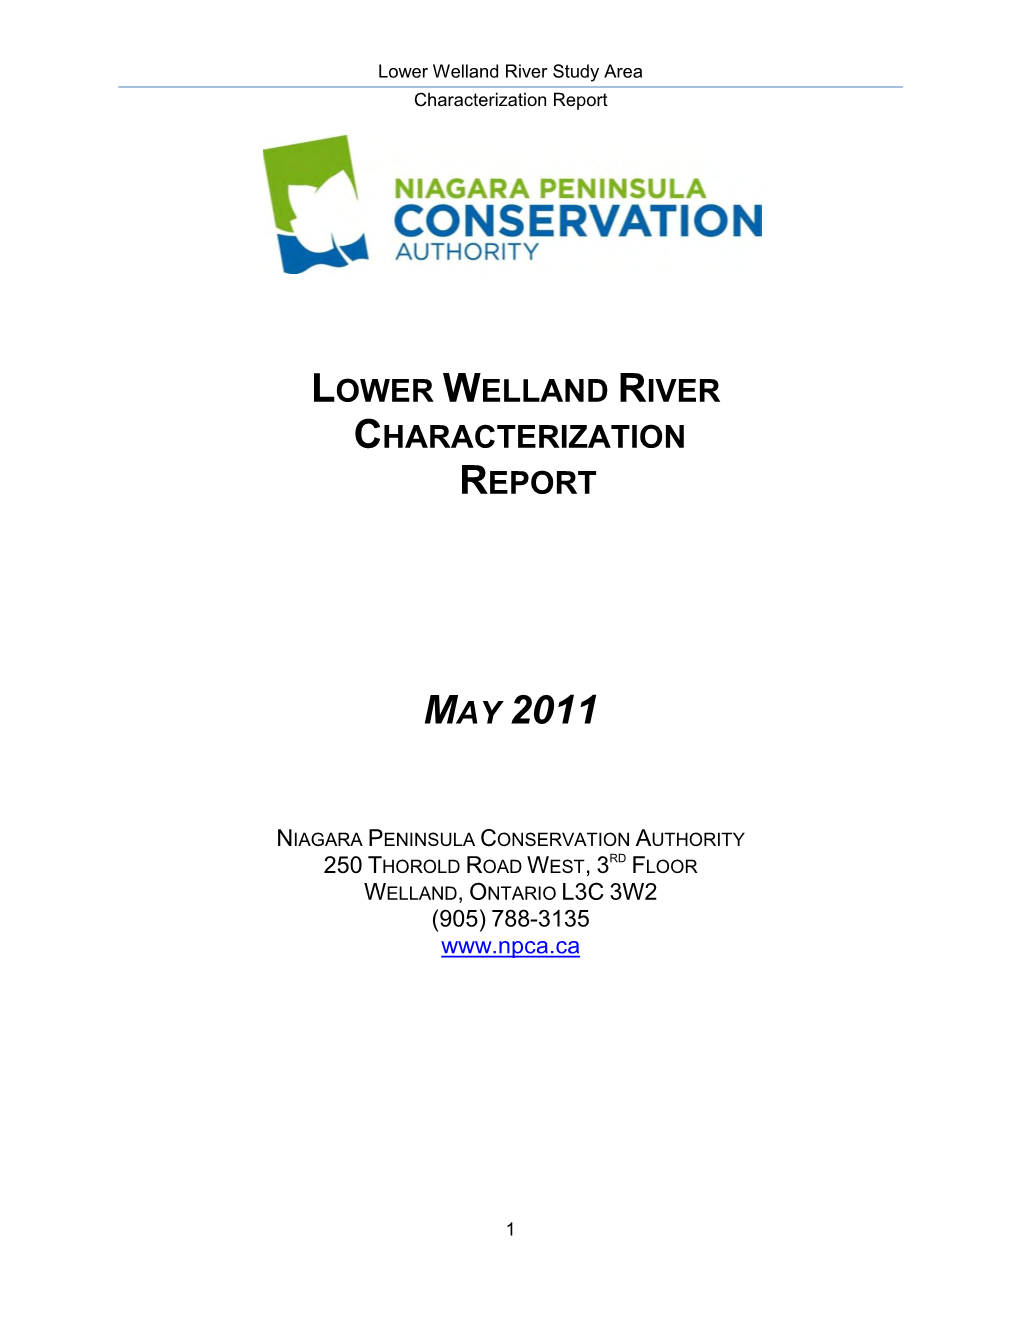 Lower Welland River Characterization Report May 2011